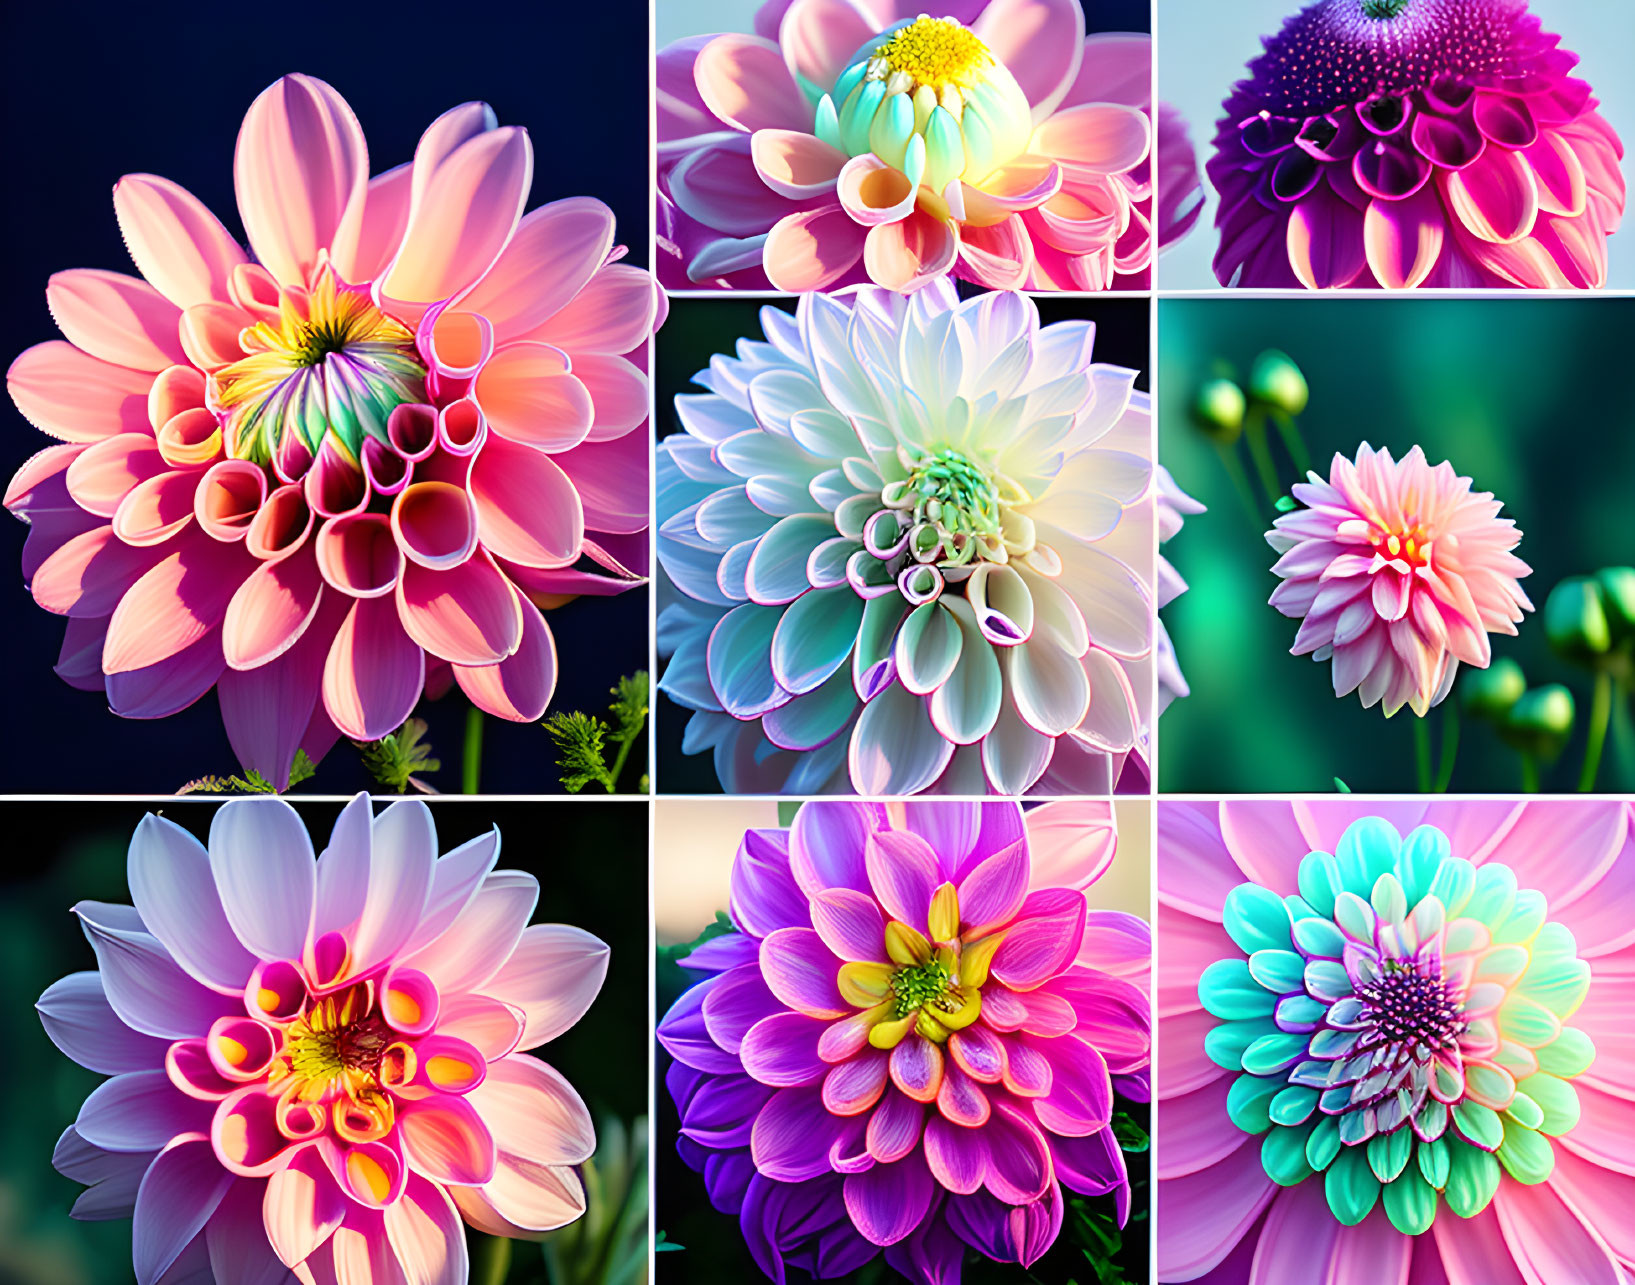 Colorful Dahlia Flower Collage in Various Shades and Patterns